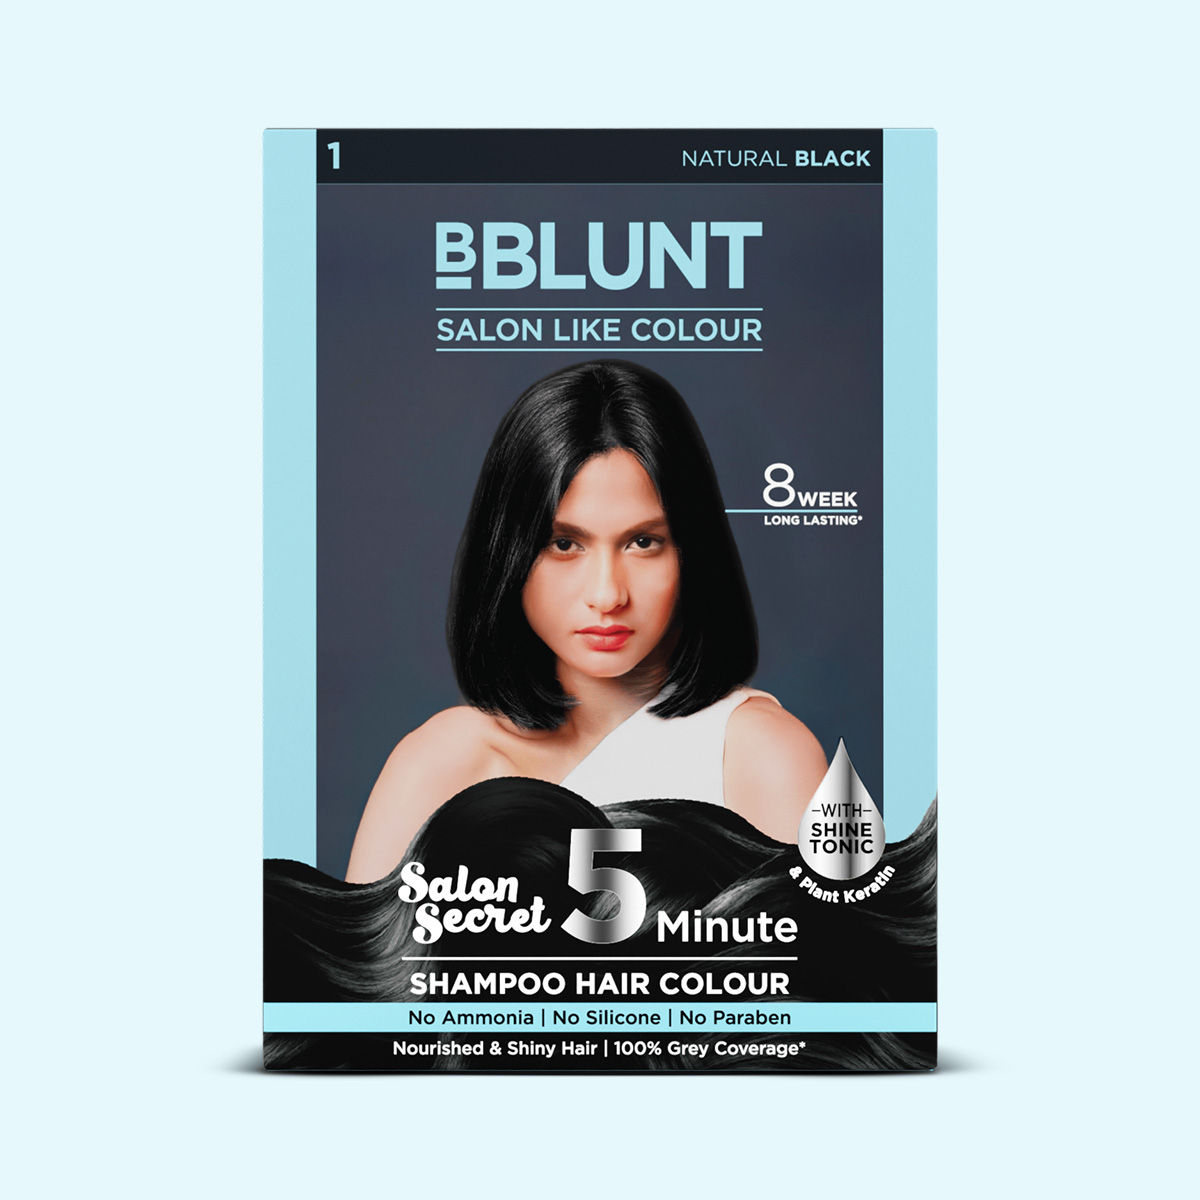 Bblunt Natural Black 5 Minute Shampoo Hair Colour For 100 Percentage Grey Coverage 20ml X 5 7 Display 1681708124 F597911c 